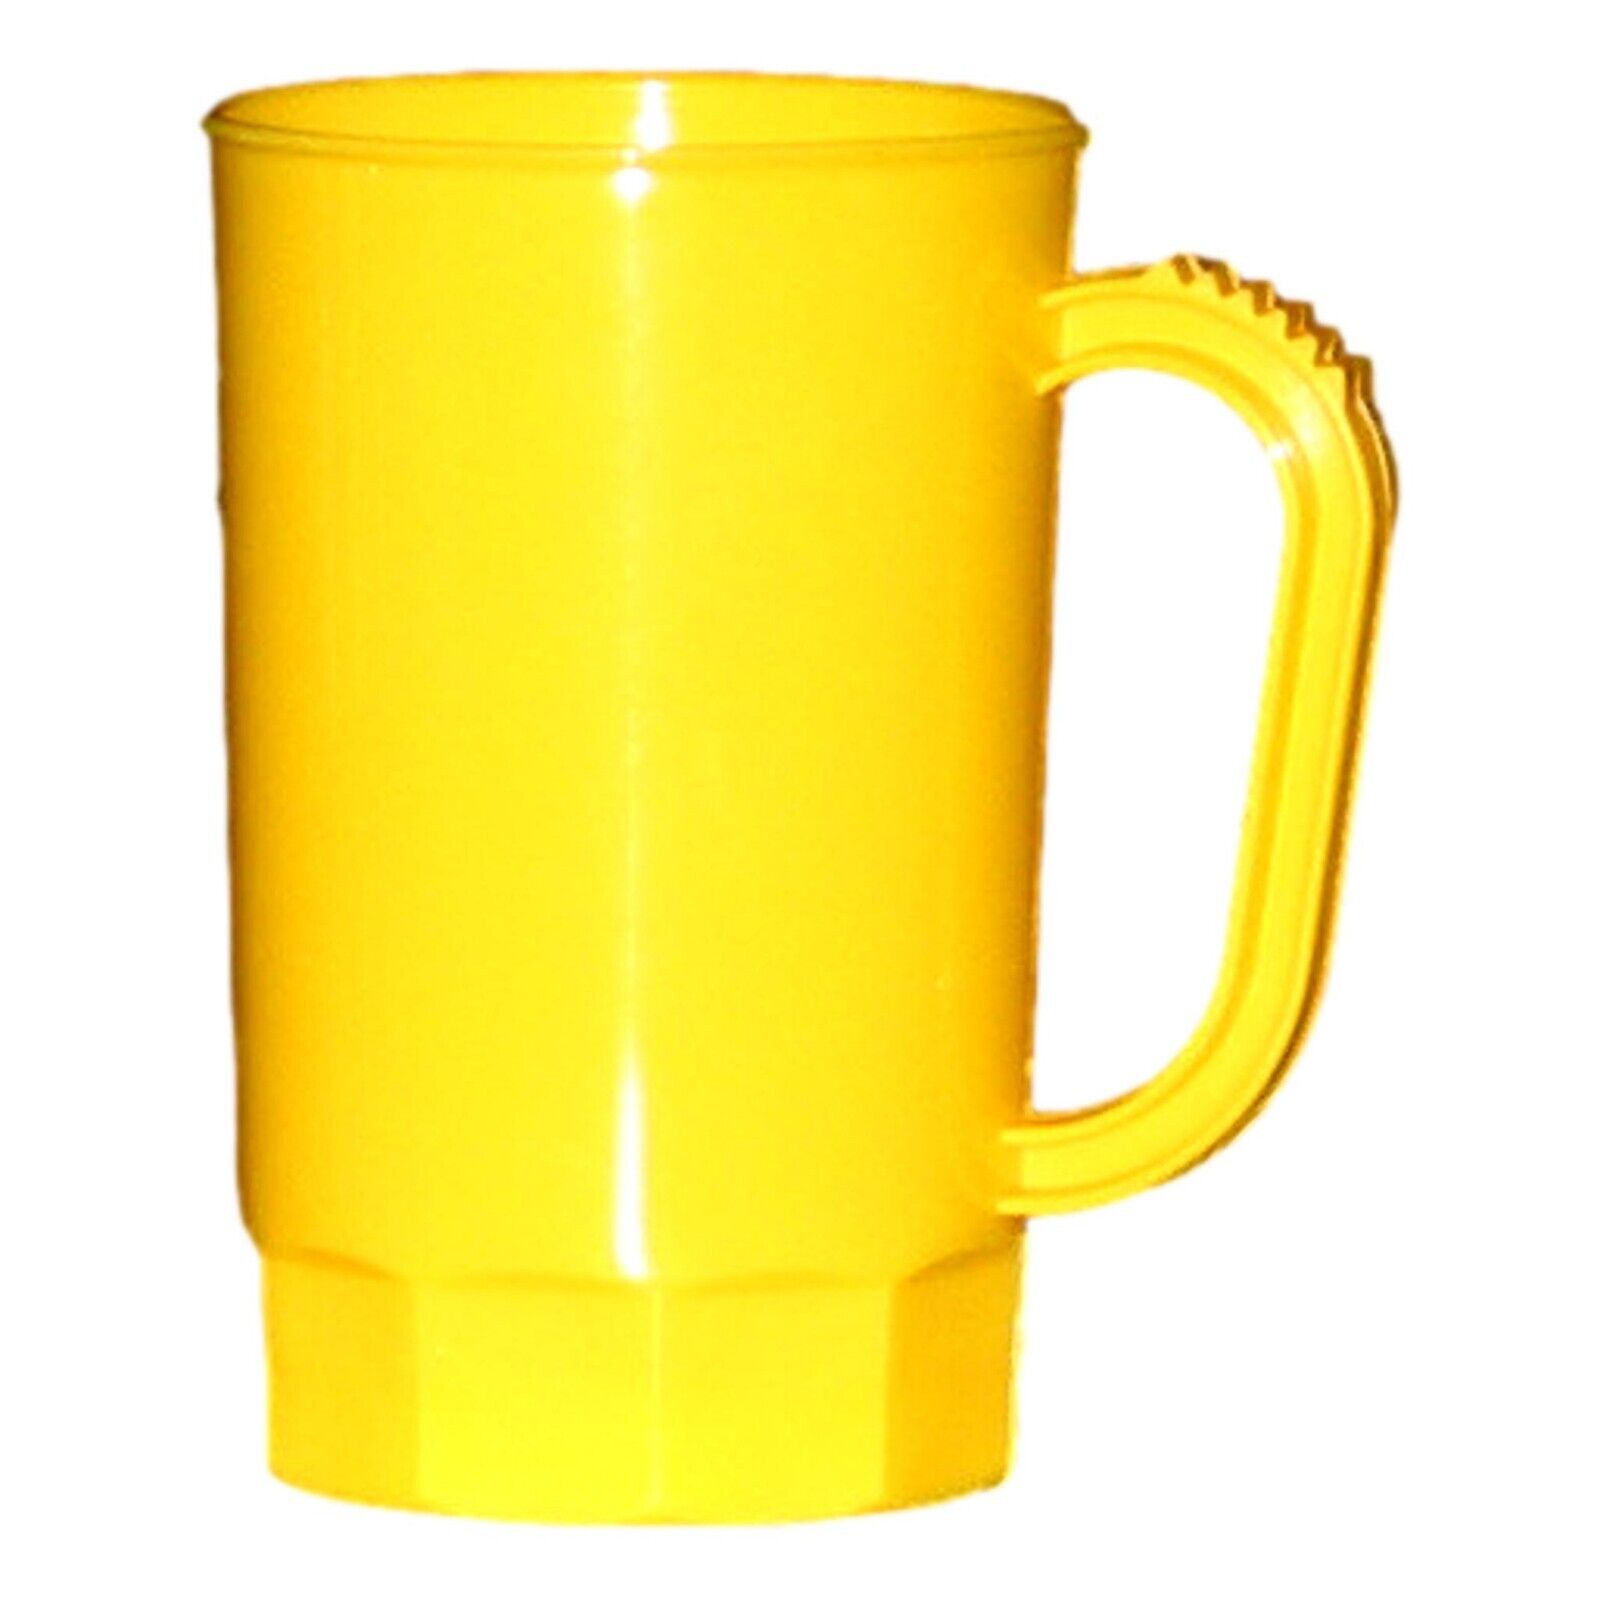 6  Beer Mugs, 1 Pint, Made in America, Lead Free Non Toxic Free Ship Jean's USA Products Does Not Apply - фотография #7